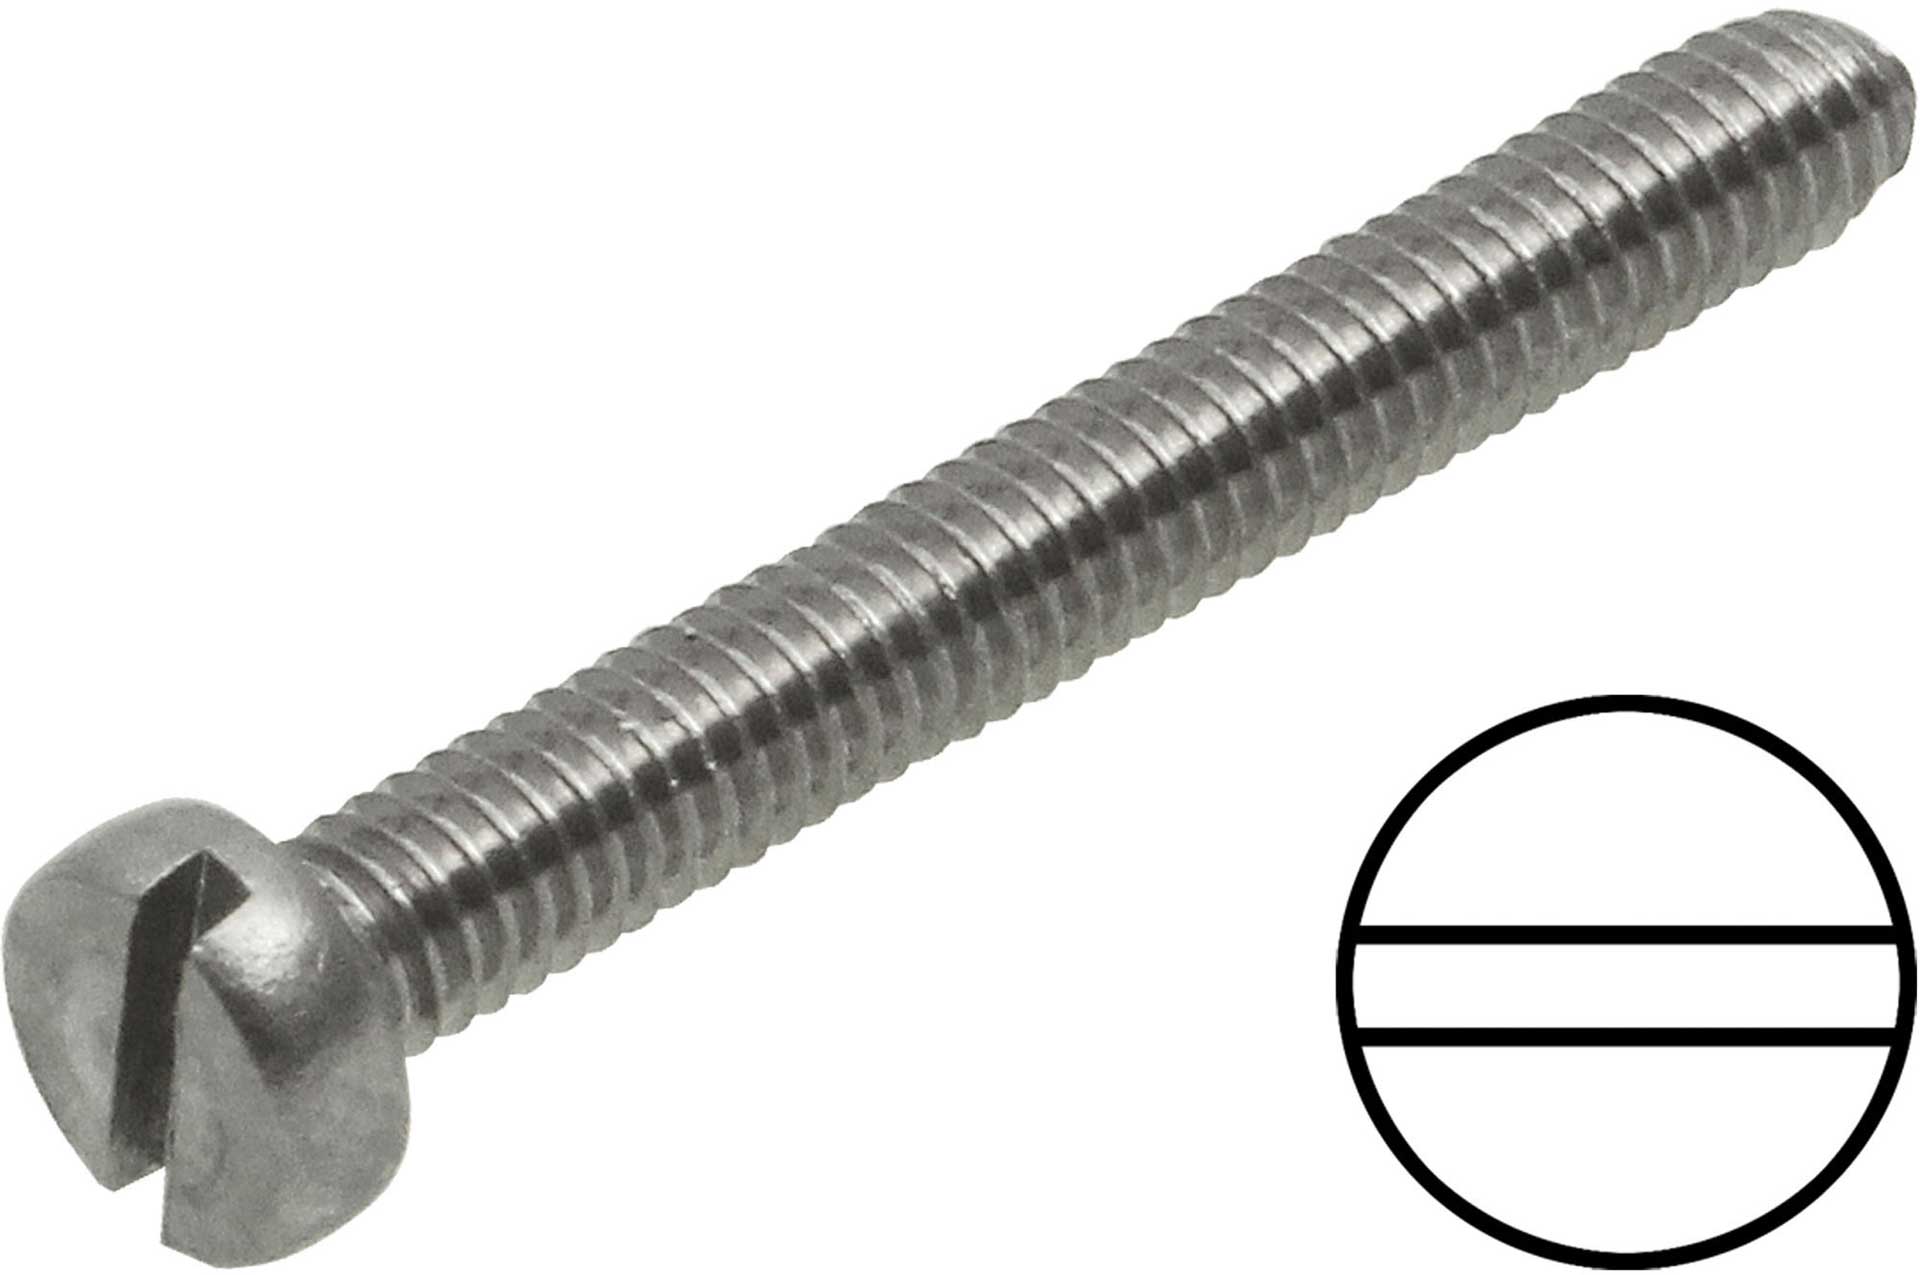 Modellbau Lindinger CHEESE-HEAD BOLTS M2/4MM STAINLESS STEEL, 10PCS.